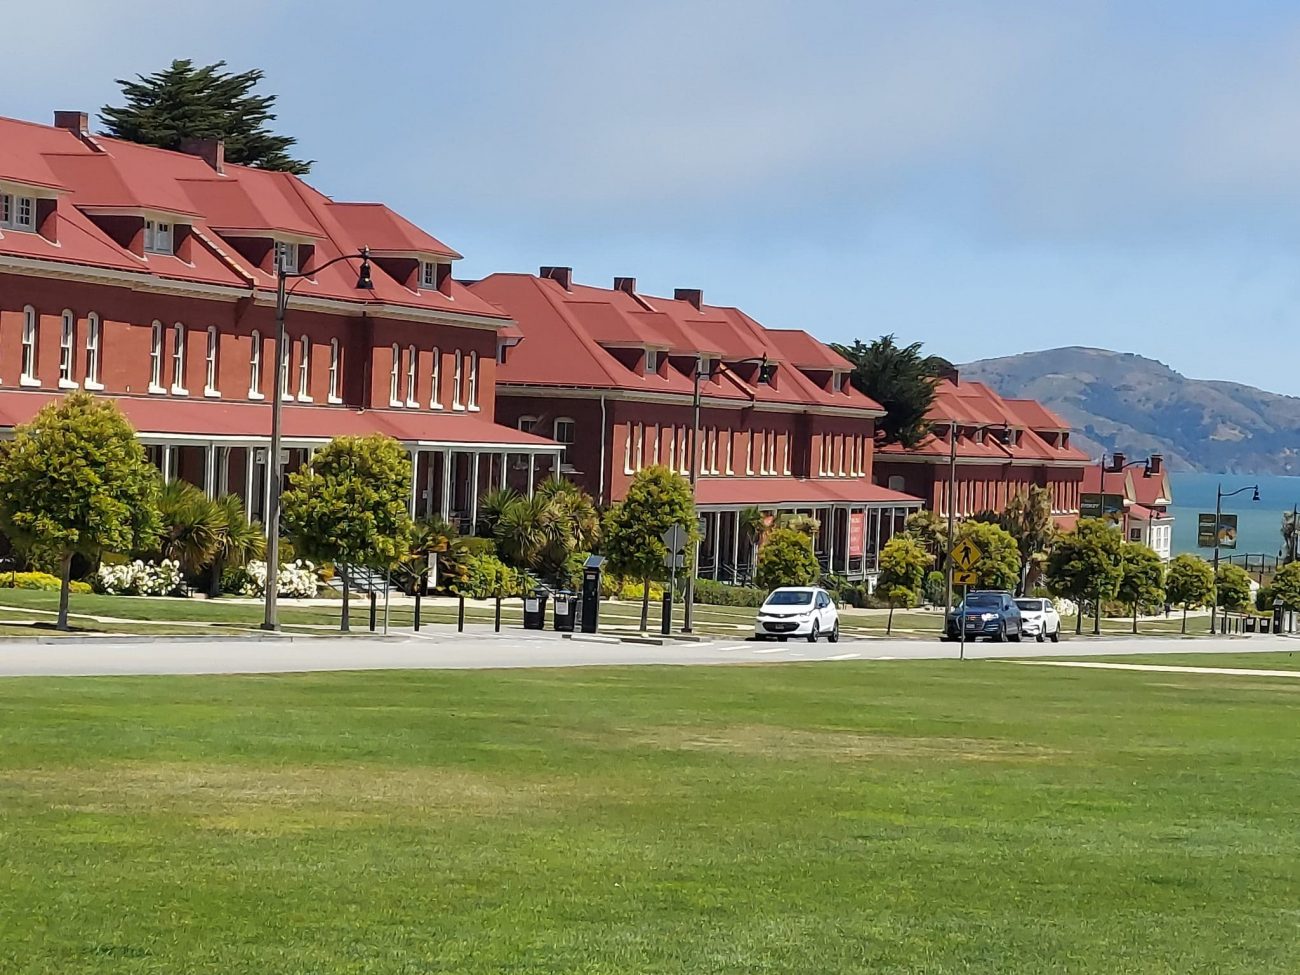 Open Space Encourages Playing on Former Parade Field at San Francisco Presidio